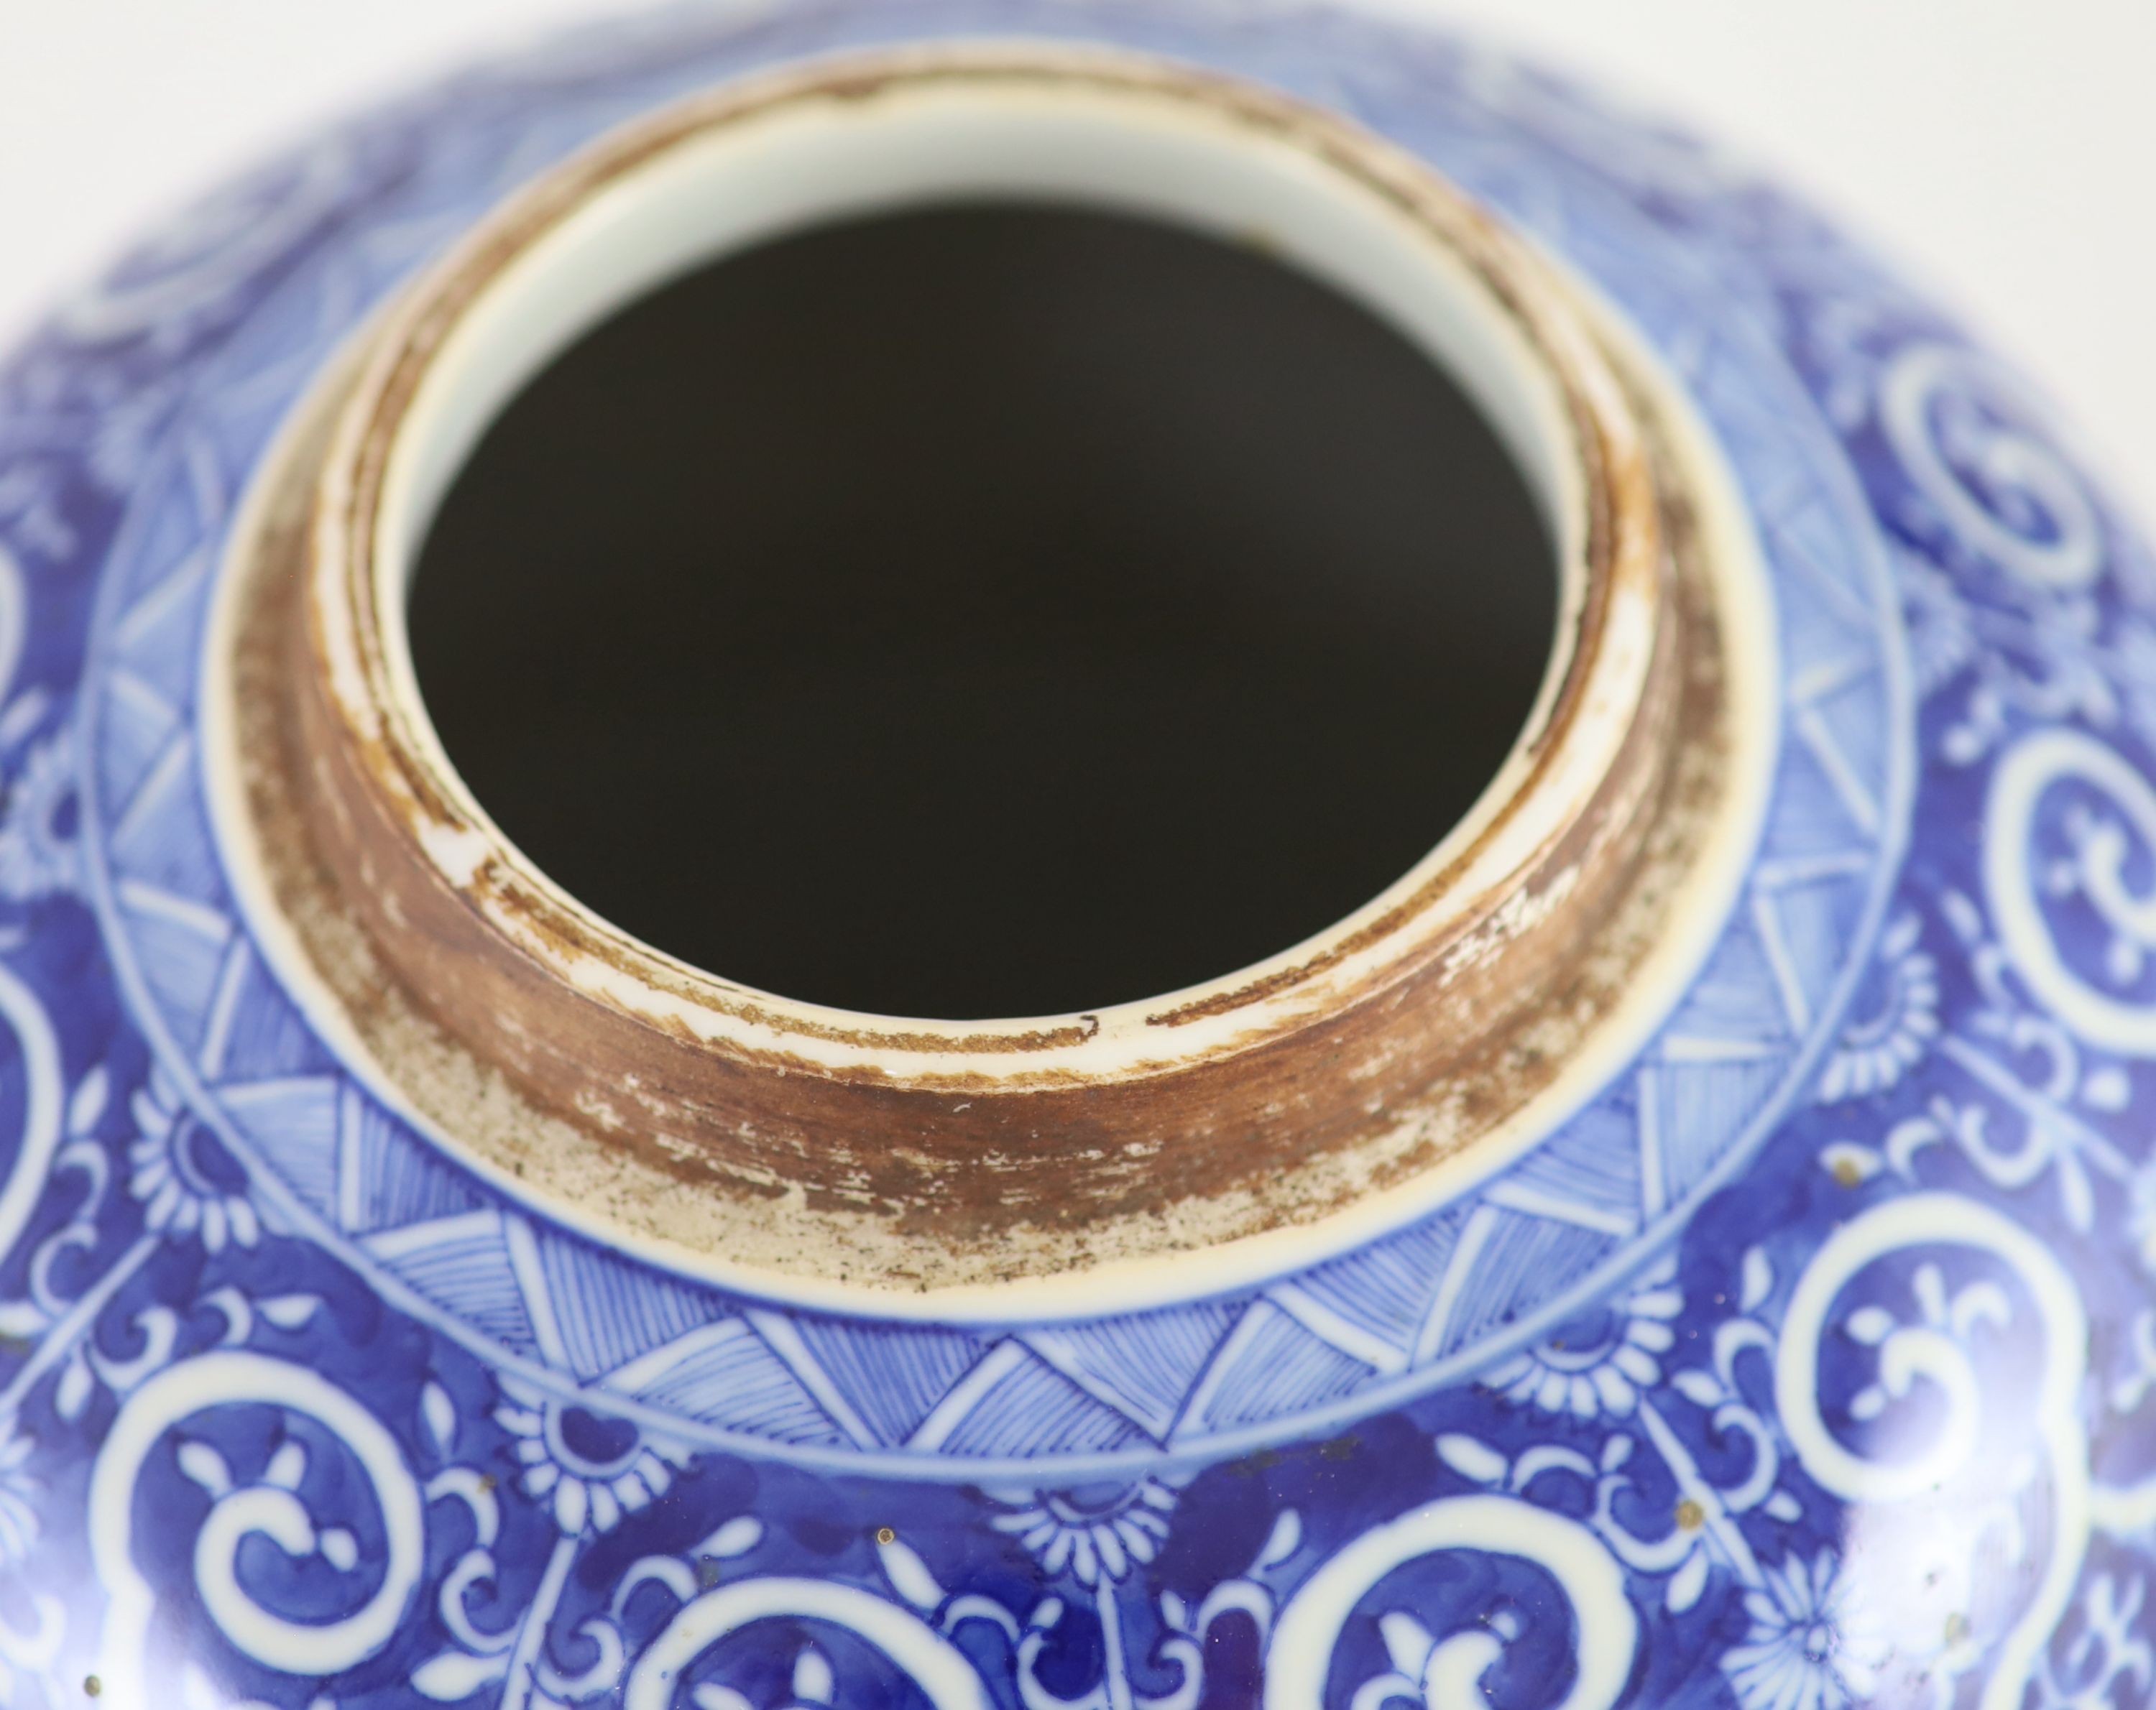 A large Chinese blue and white ovoid jar, 19th century, 35cm high, wood cover